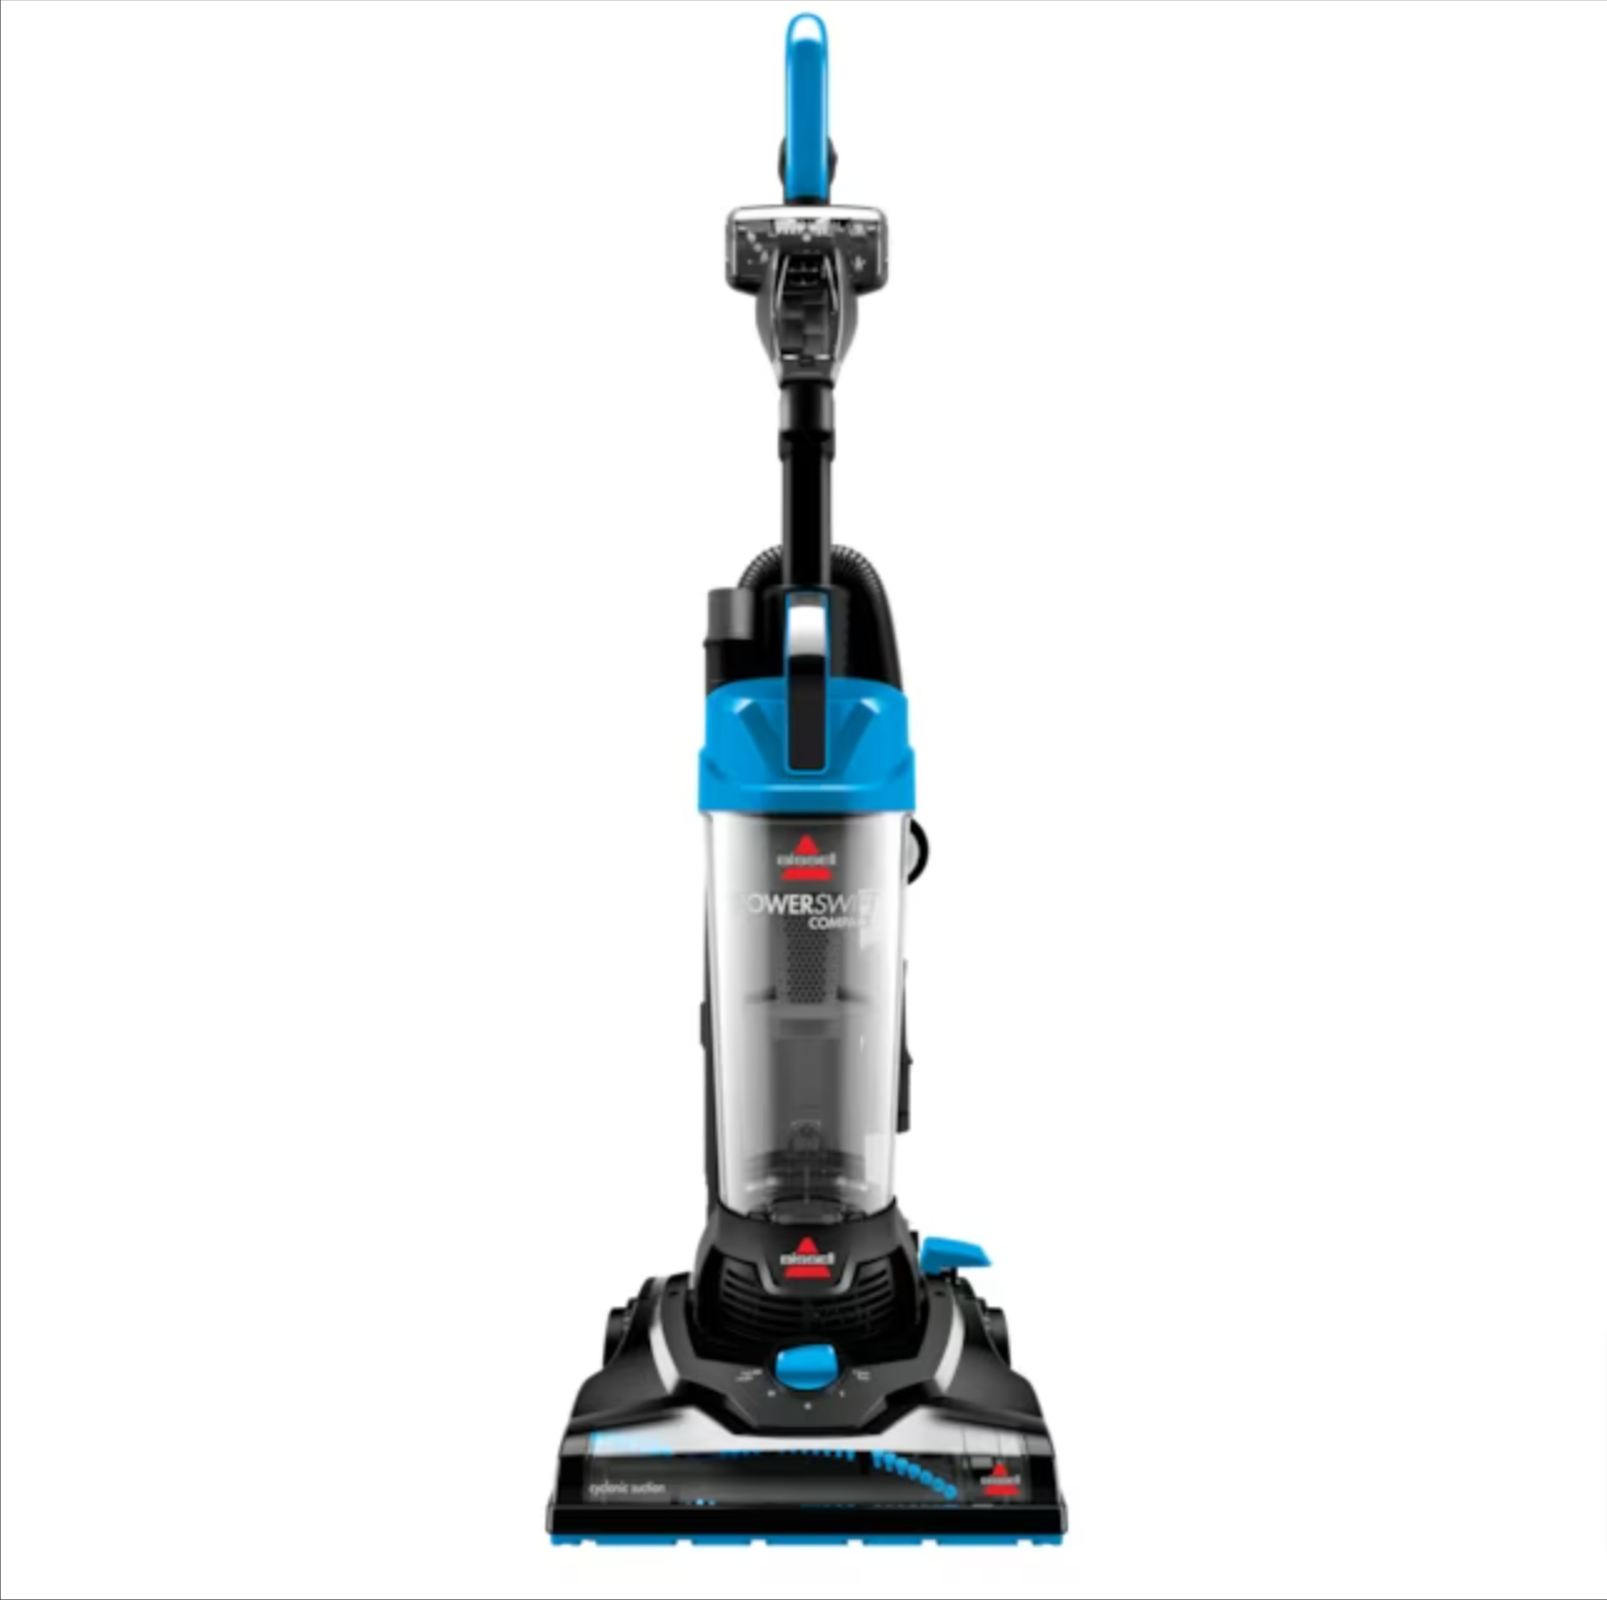 BISSELL PowerSwift Compact Corded Bagless Upright Vacuum, 25982 - $60